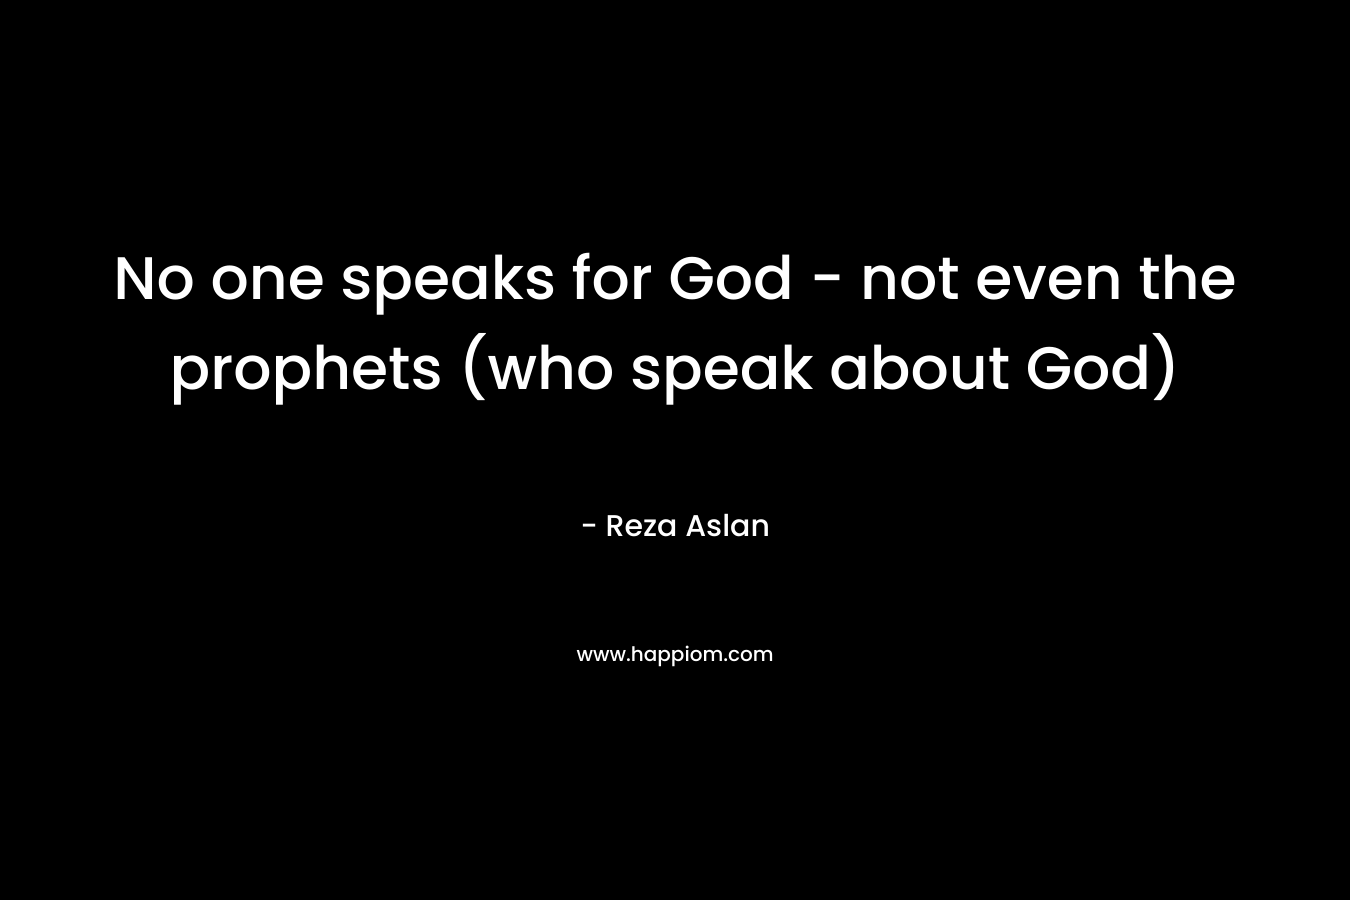 No one speaks for God - not even the prophets (who speak about God)